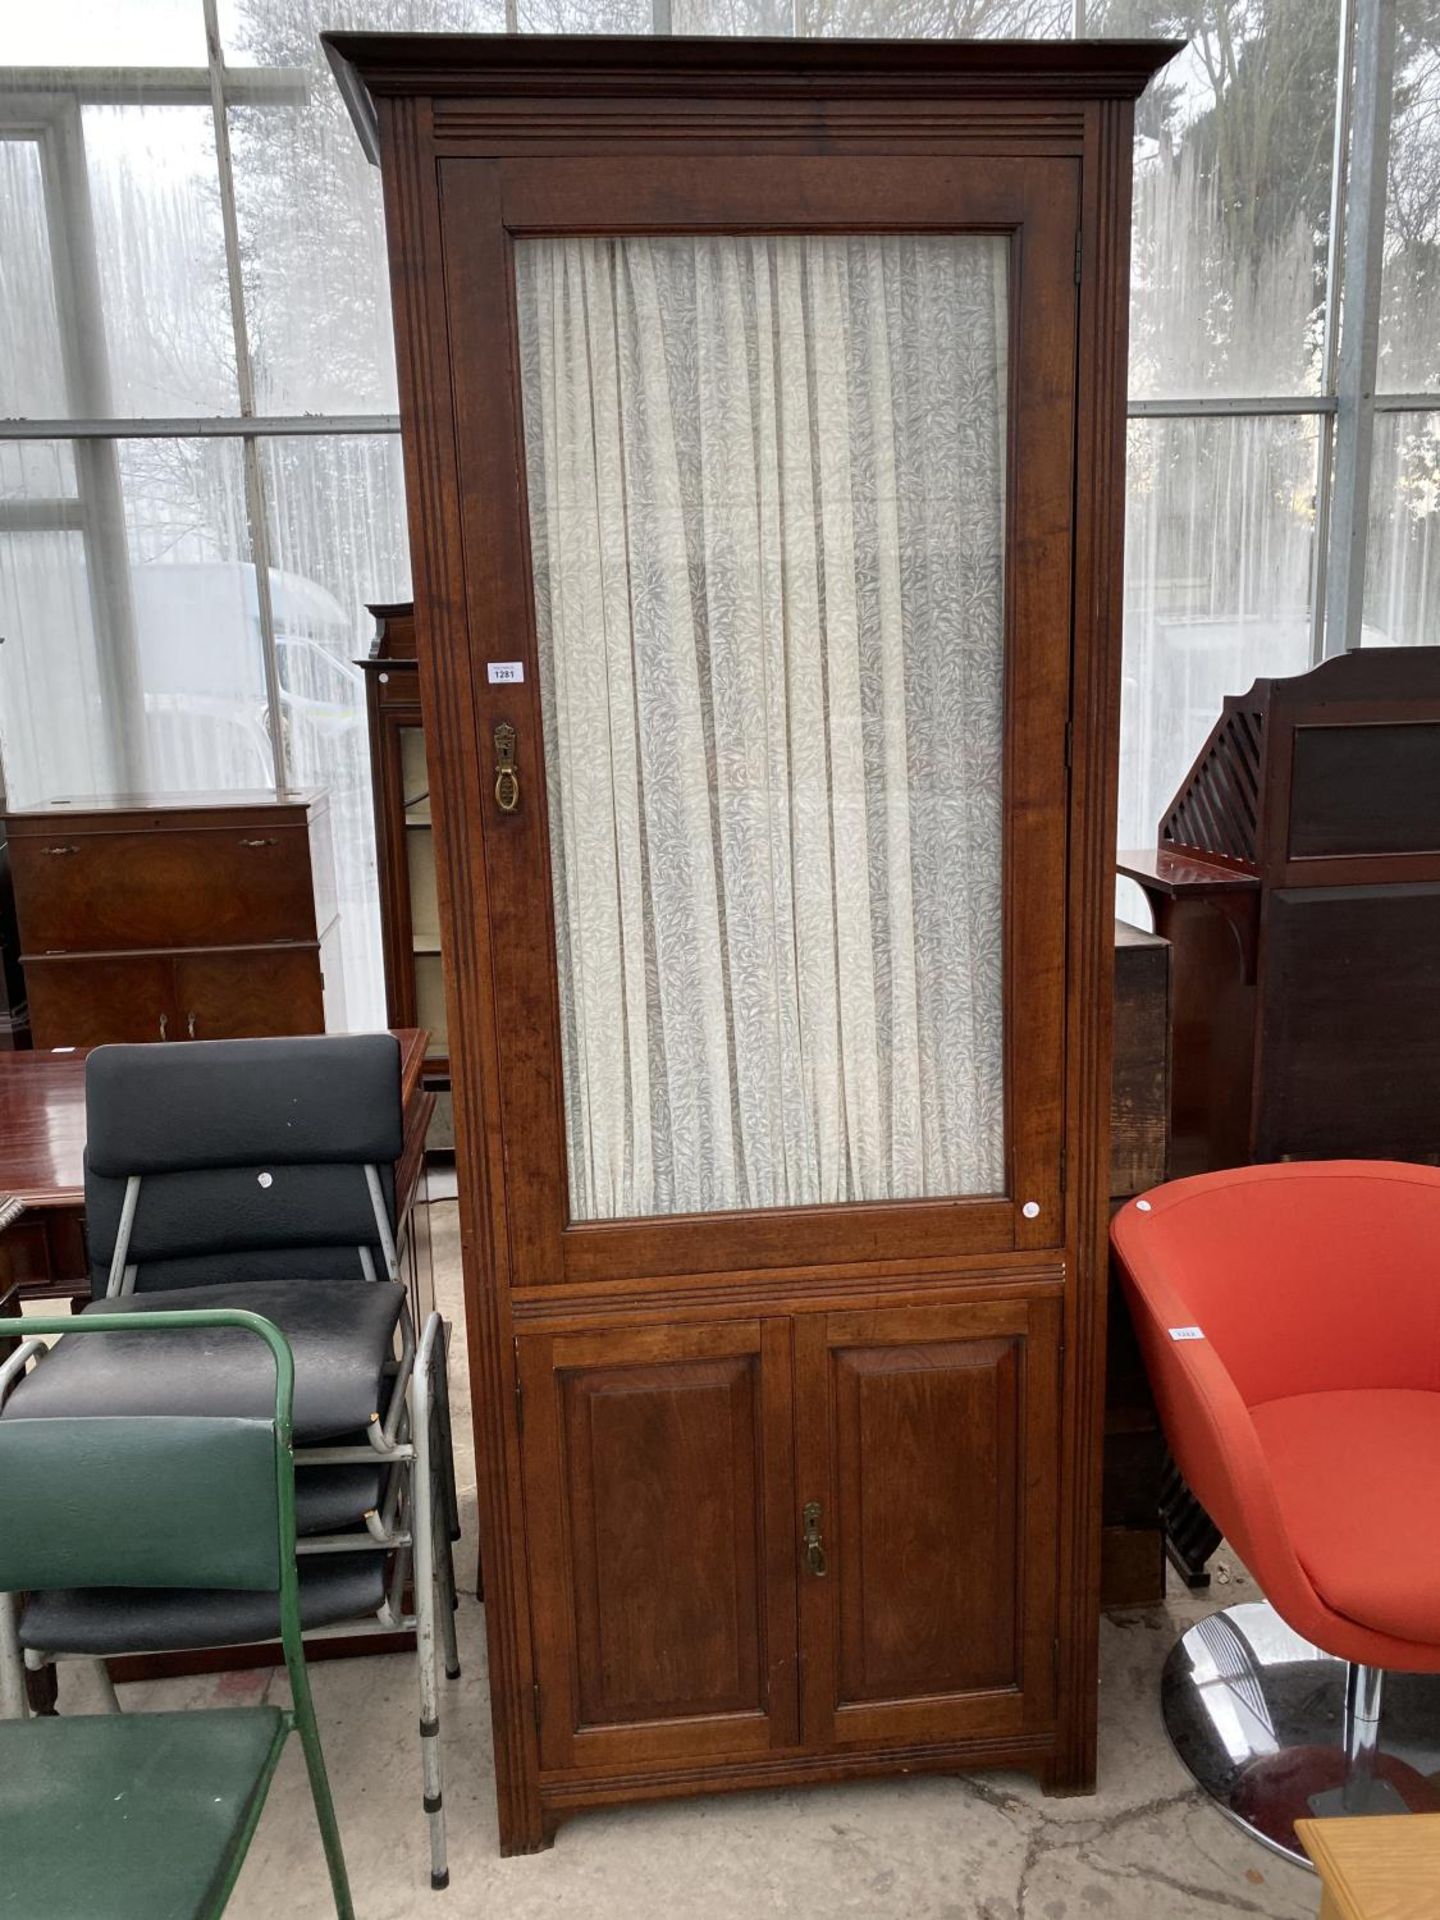 A TALL MAHOGANY CABINET WITH TWO LOWER DOORS AND UPPER GLAZED PANEL DOOR